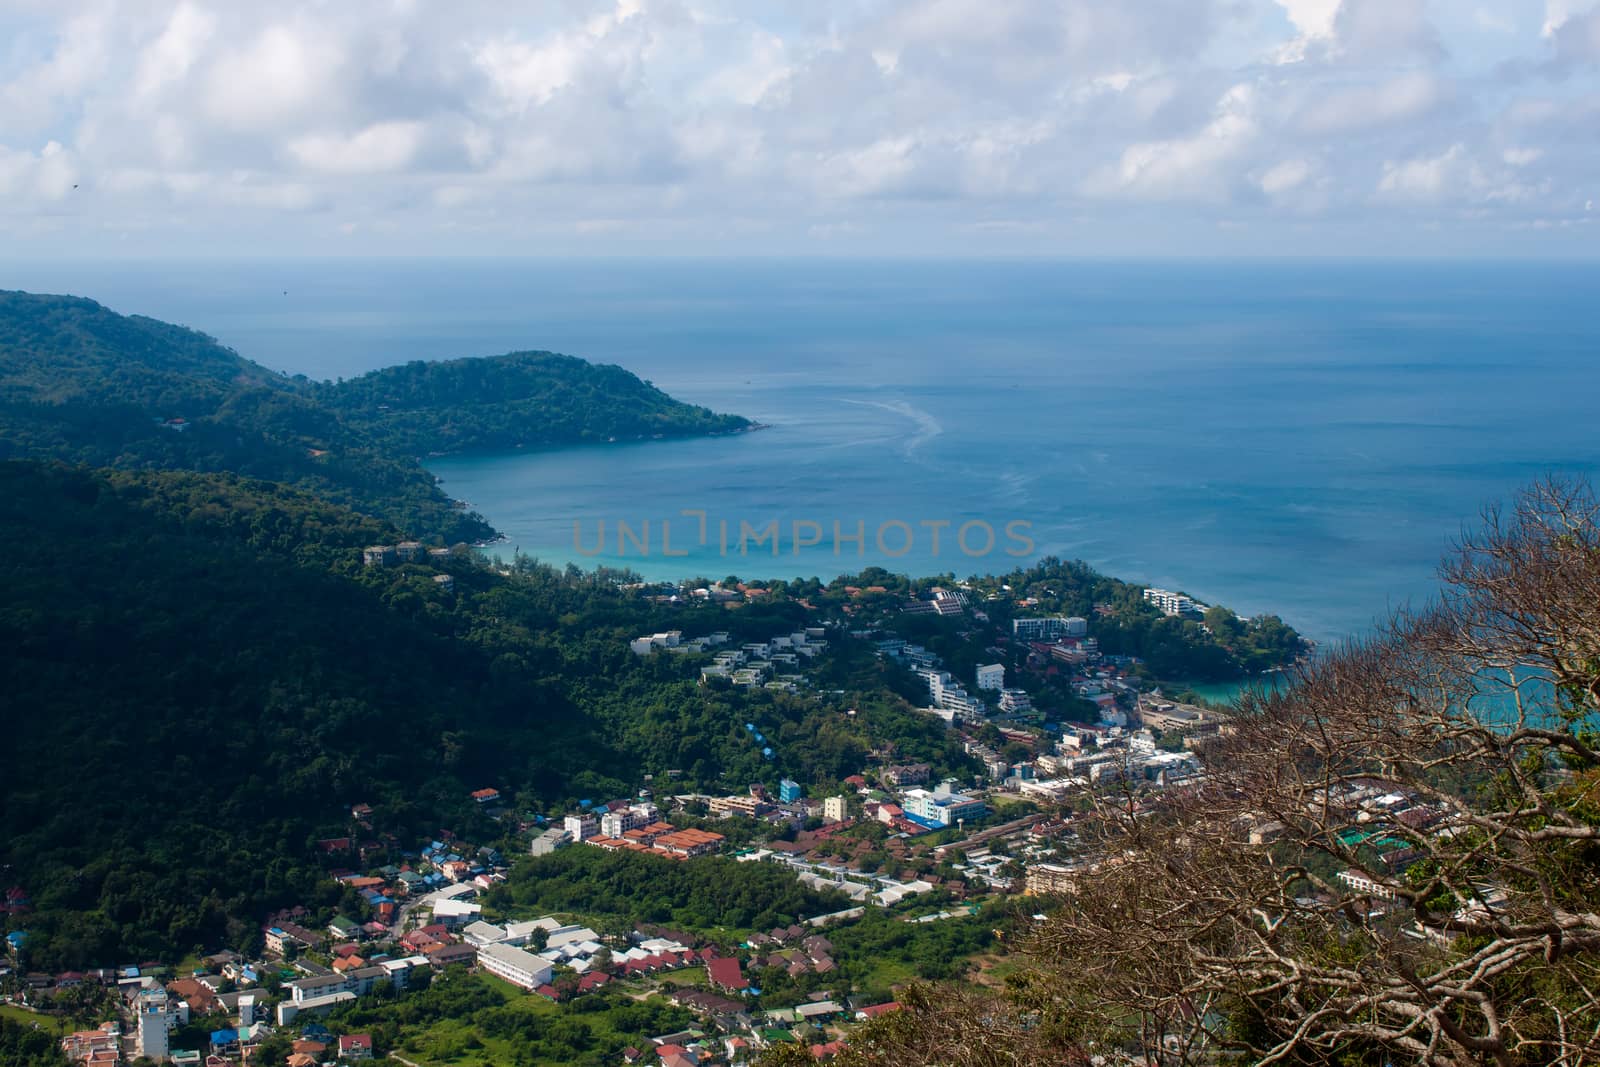 Viewpoint of the island of Phuket, Thailand